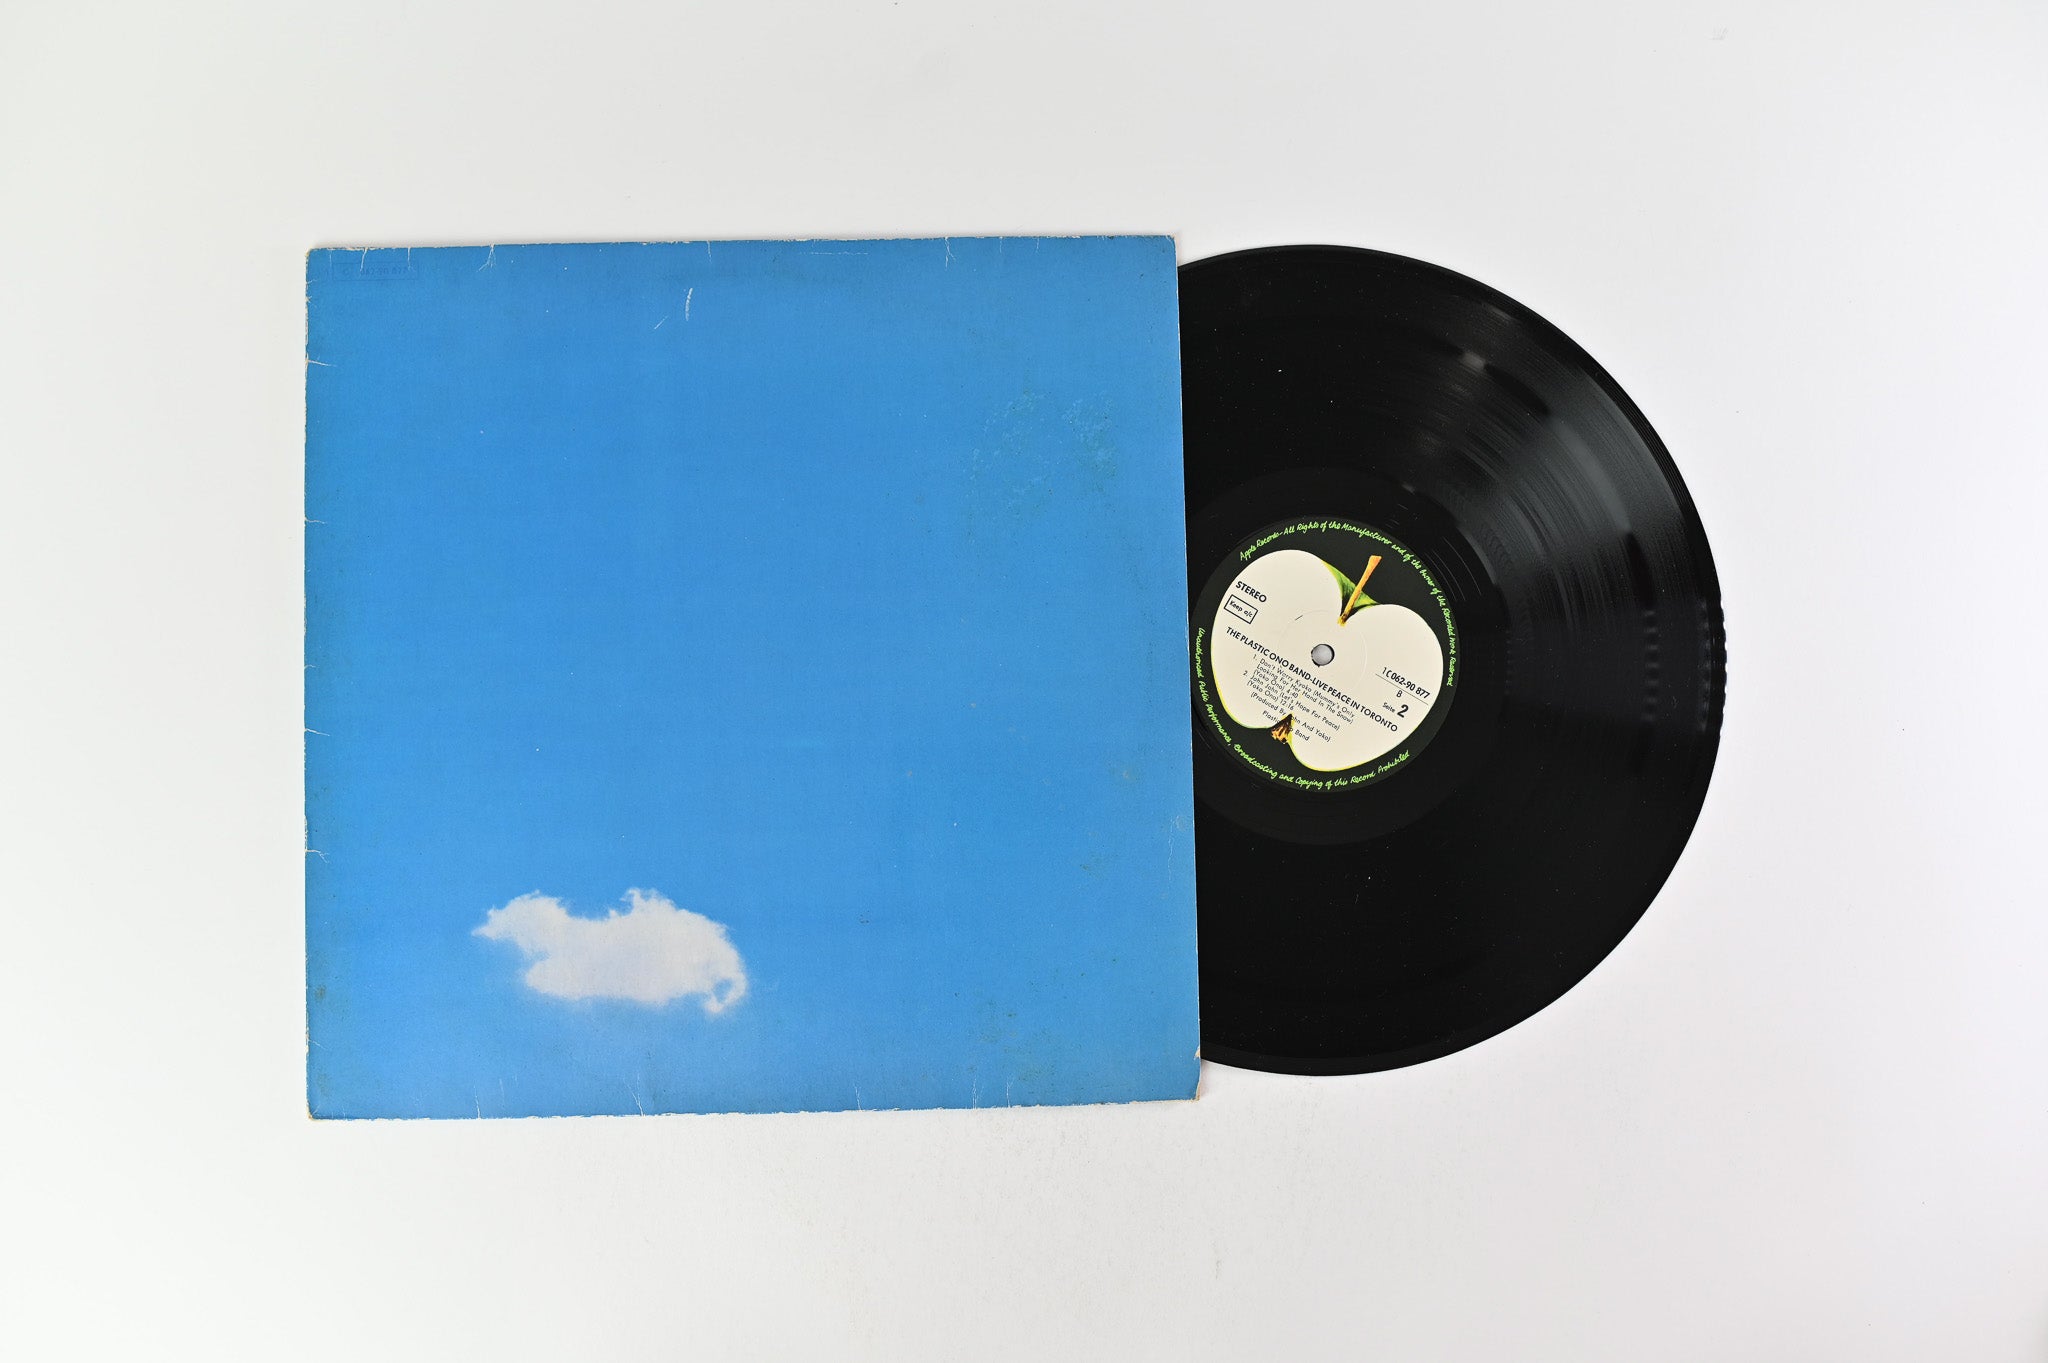 The Plastic Ono Band - Live Peace In Toronto 1969 on Apple Records